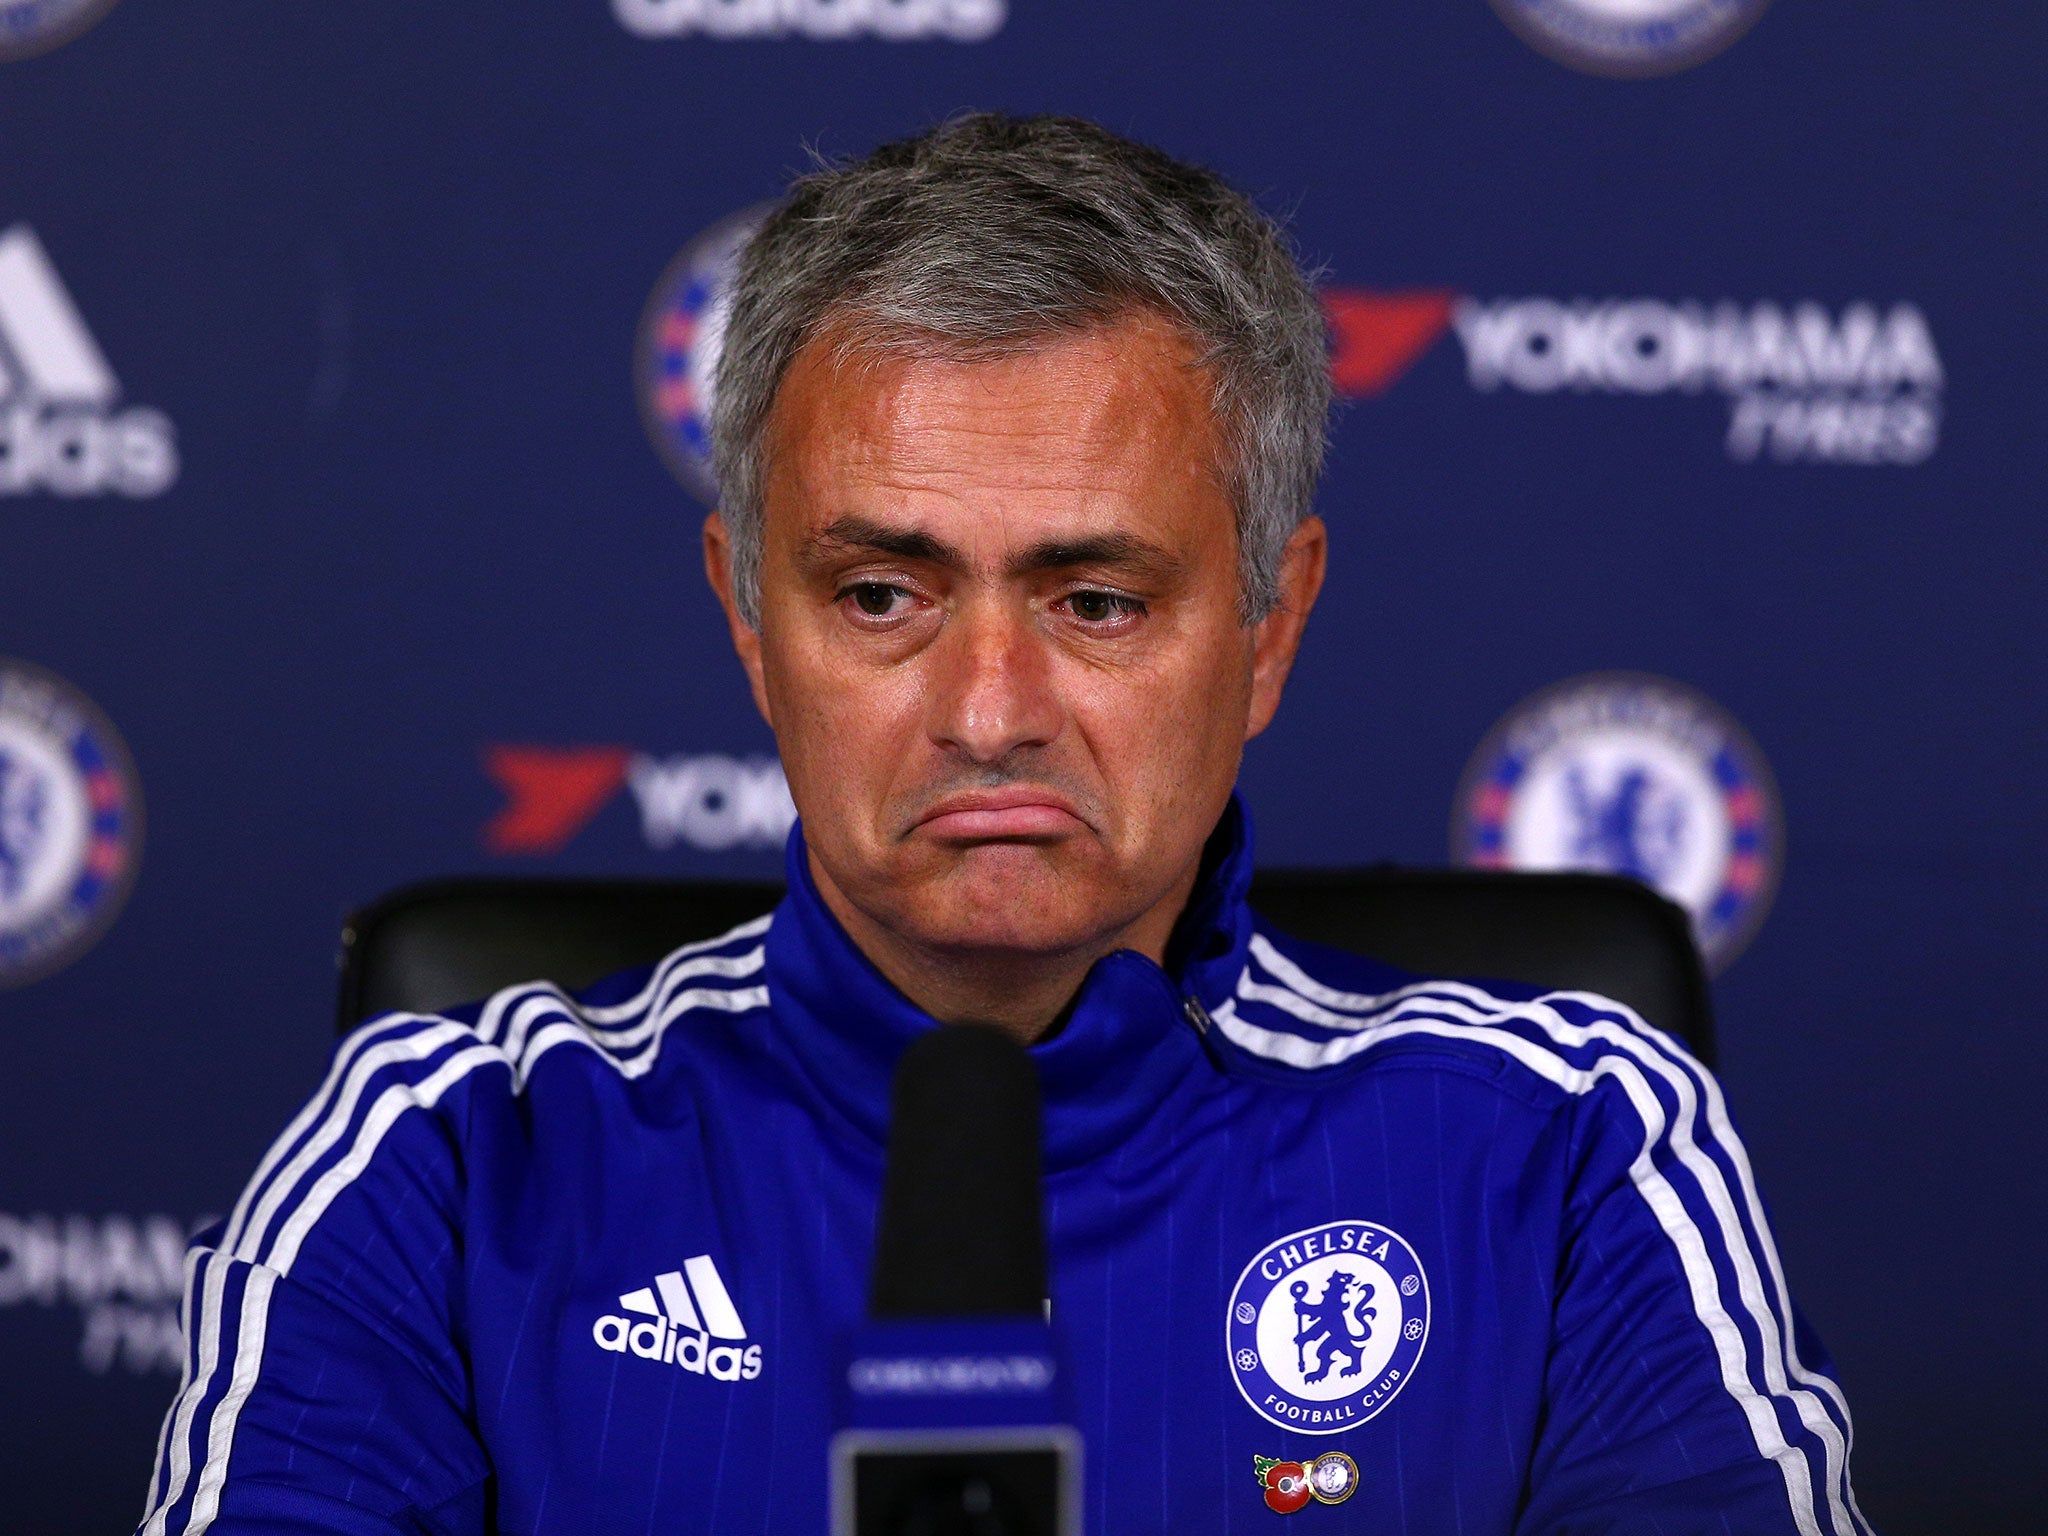 Jose Mourinho could return to Real Madrid if he leaves Chelsea